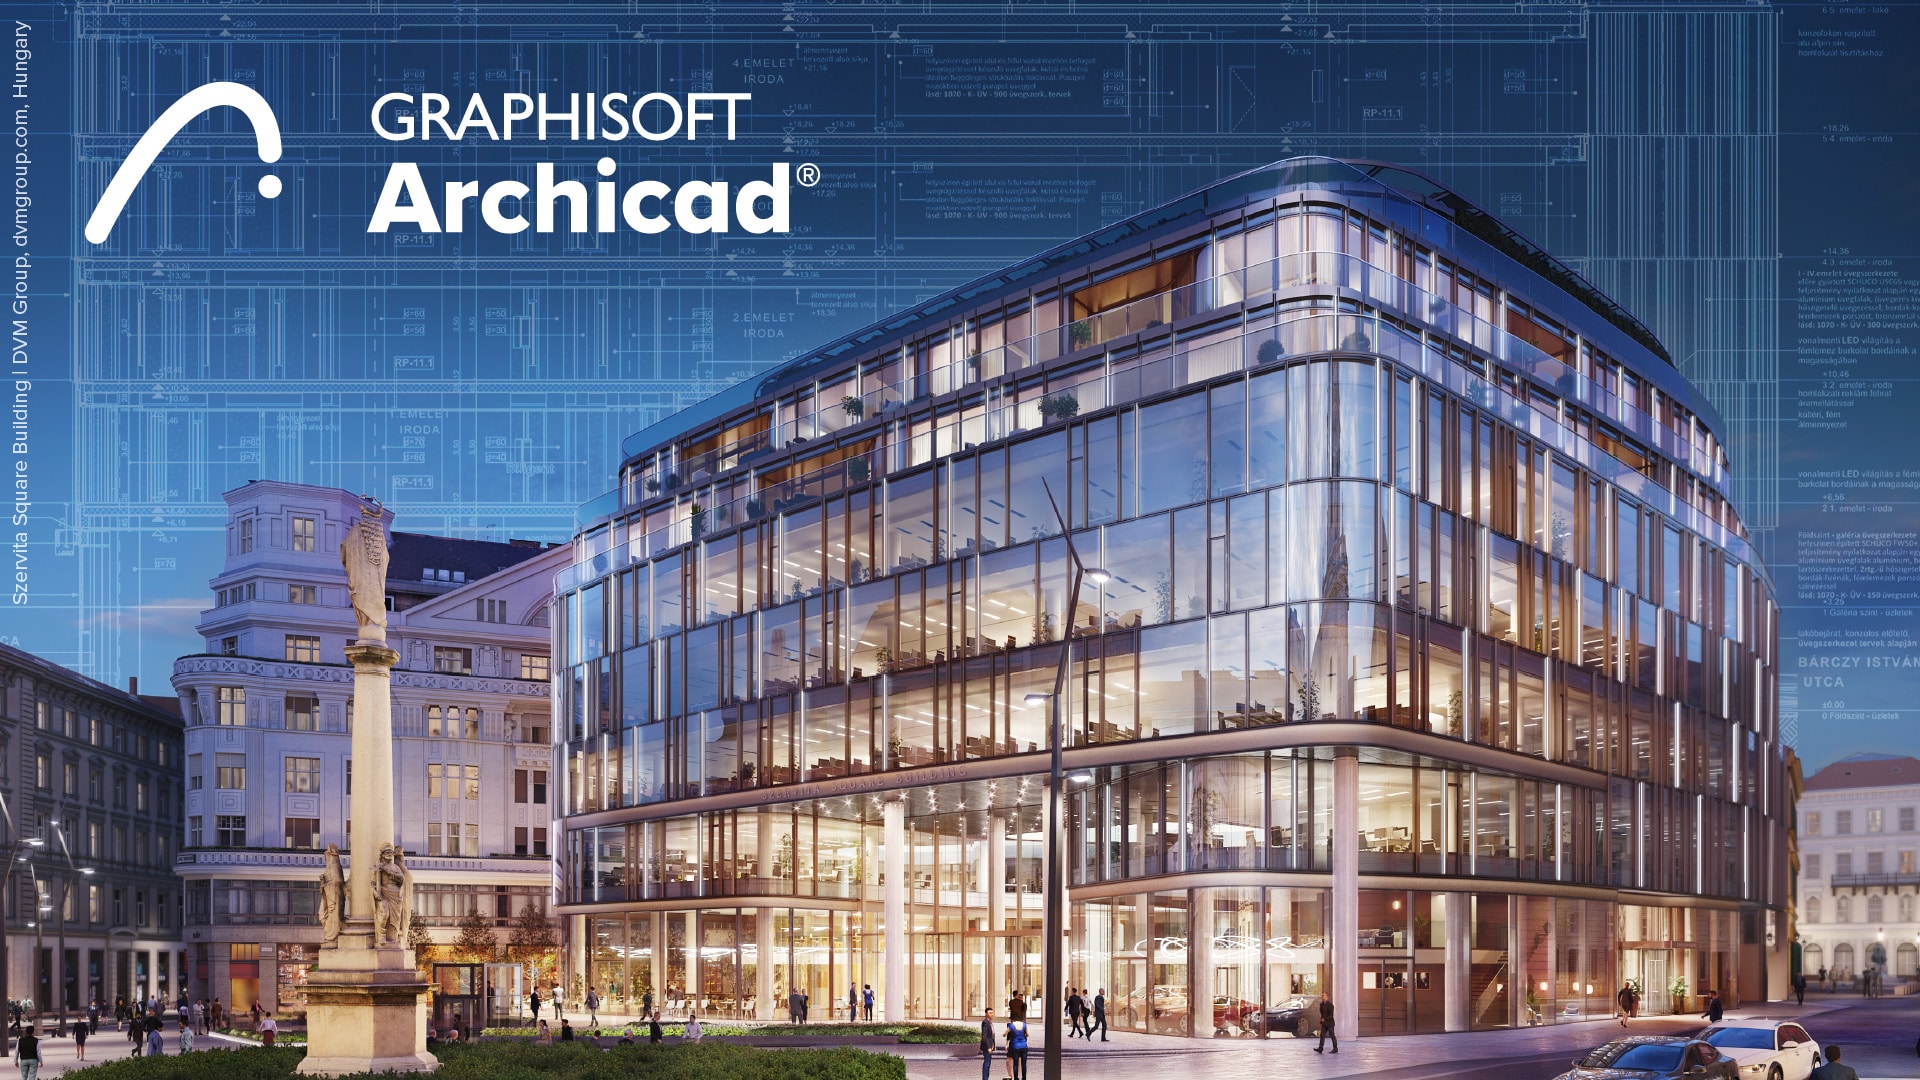 download the last version for ios ArchiCAD 27.3001